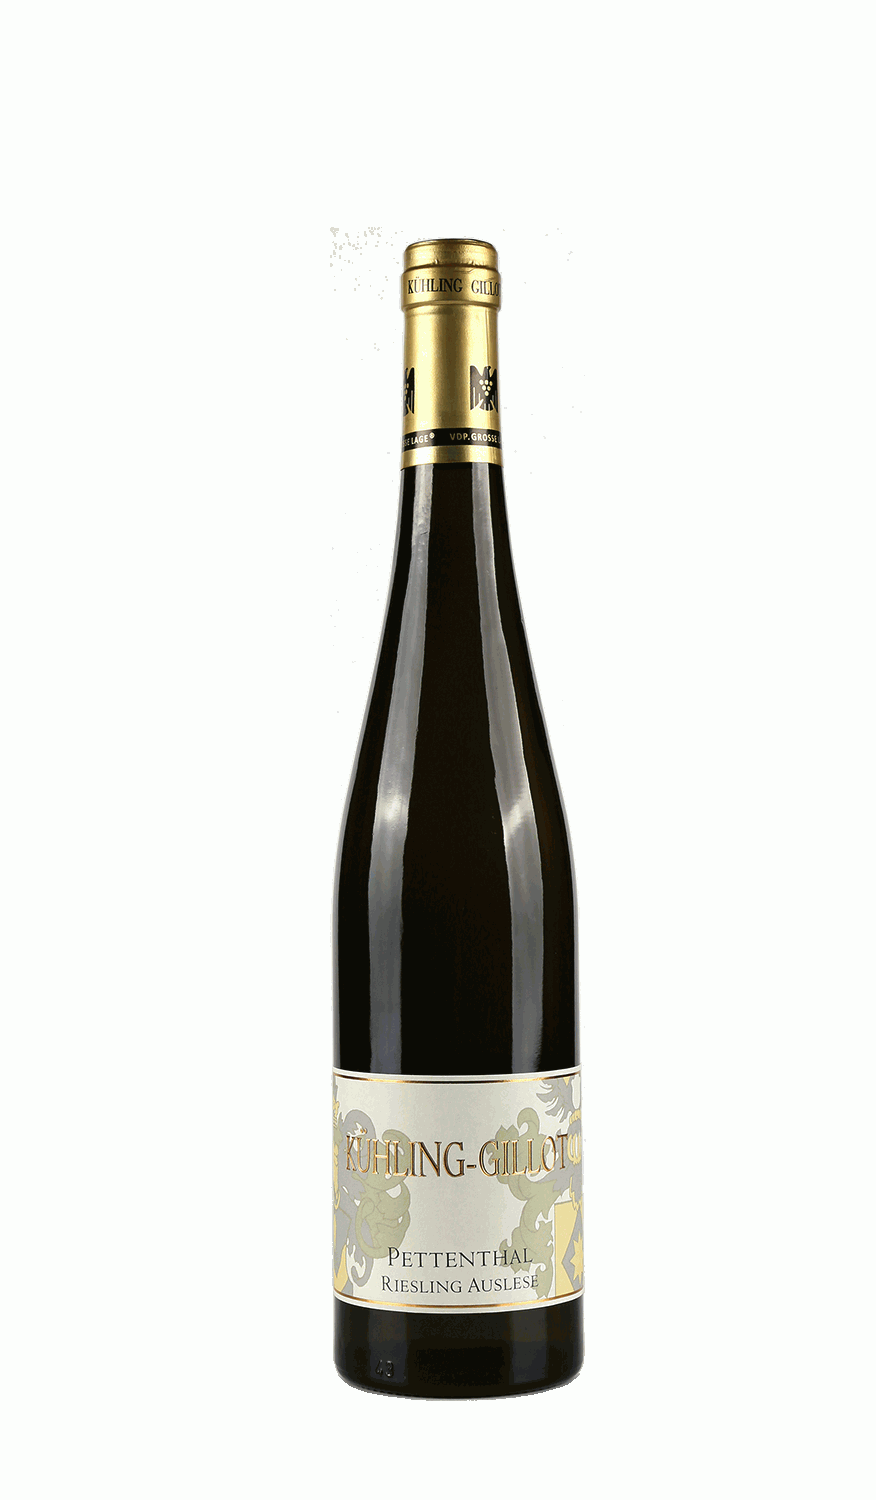 Khling-Gillot - Pettenthal Riesling Auslese 2015